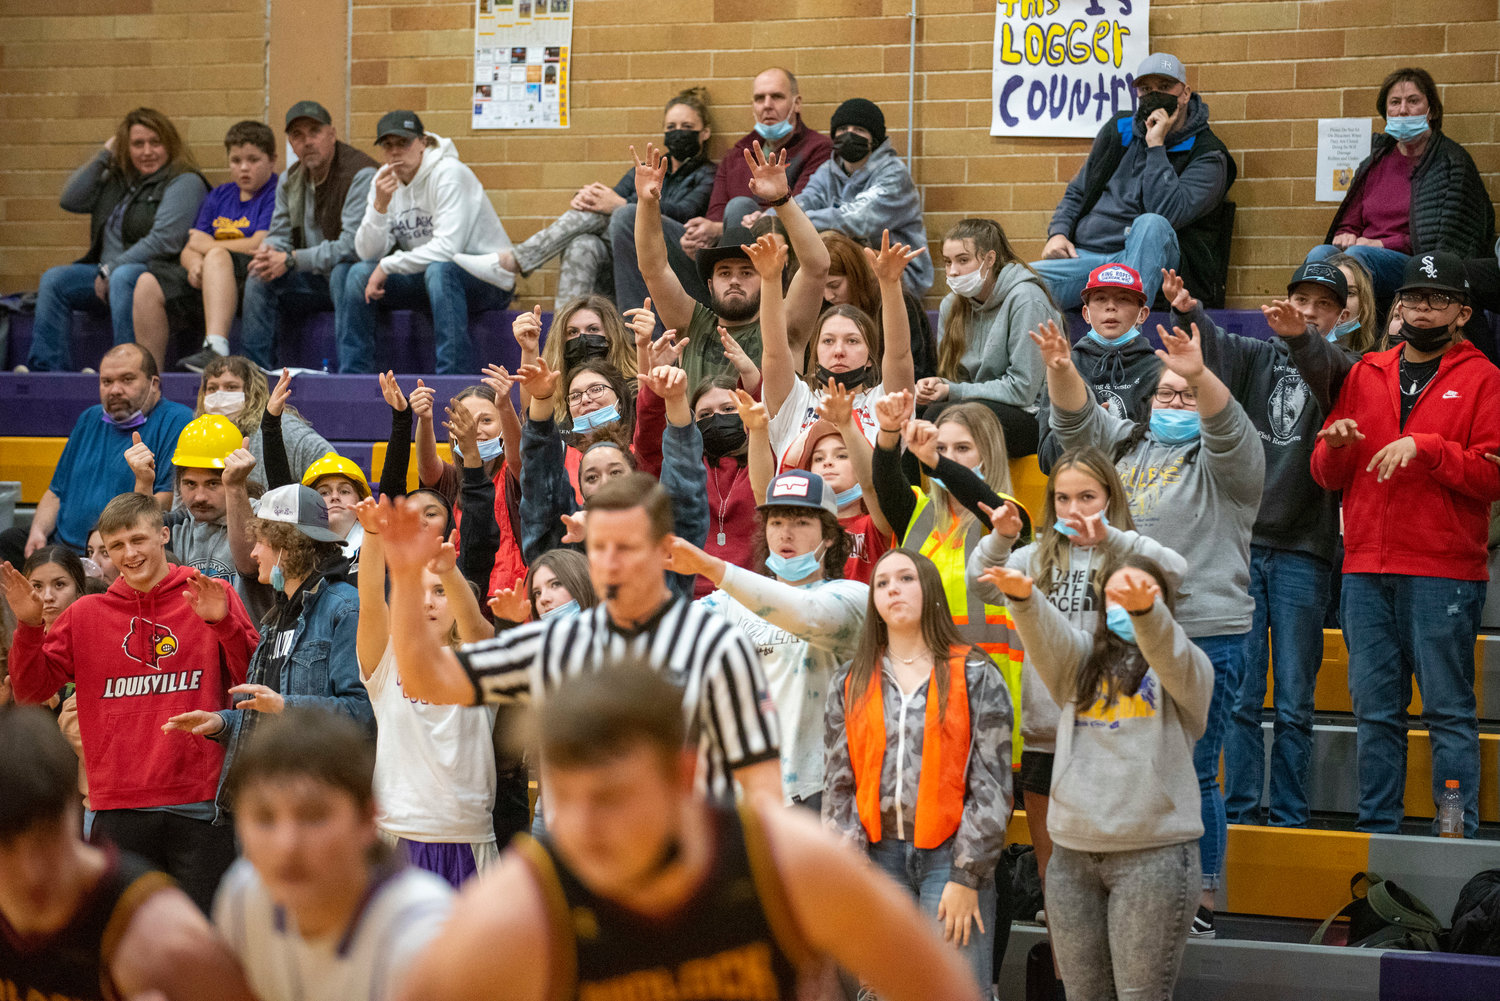 Onalaska's student section throws some jinx on Winlock's foul shooter during a game on Dec. 9.